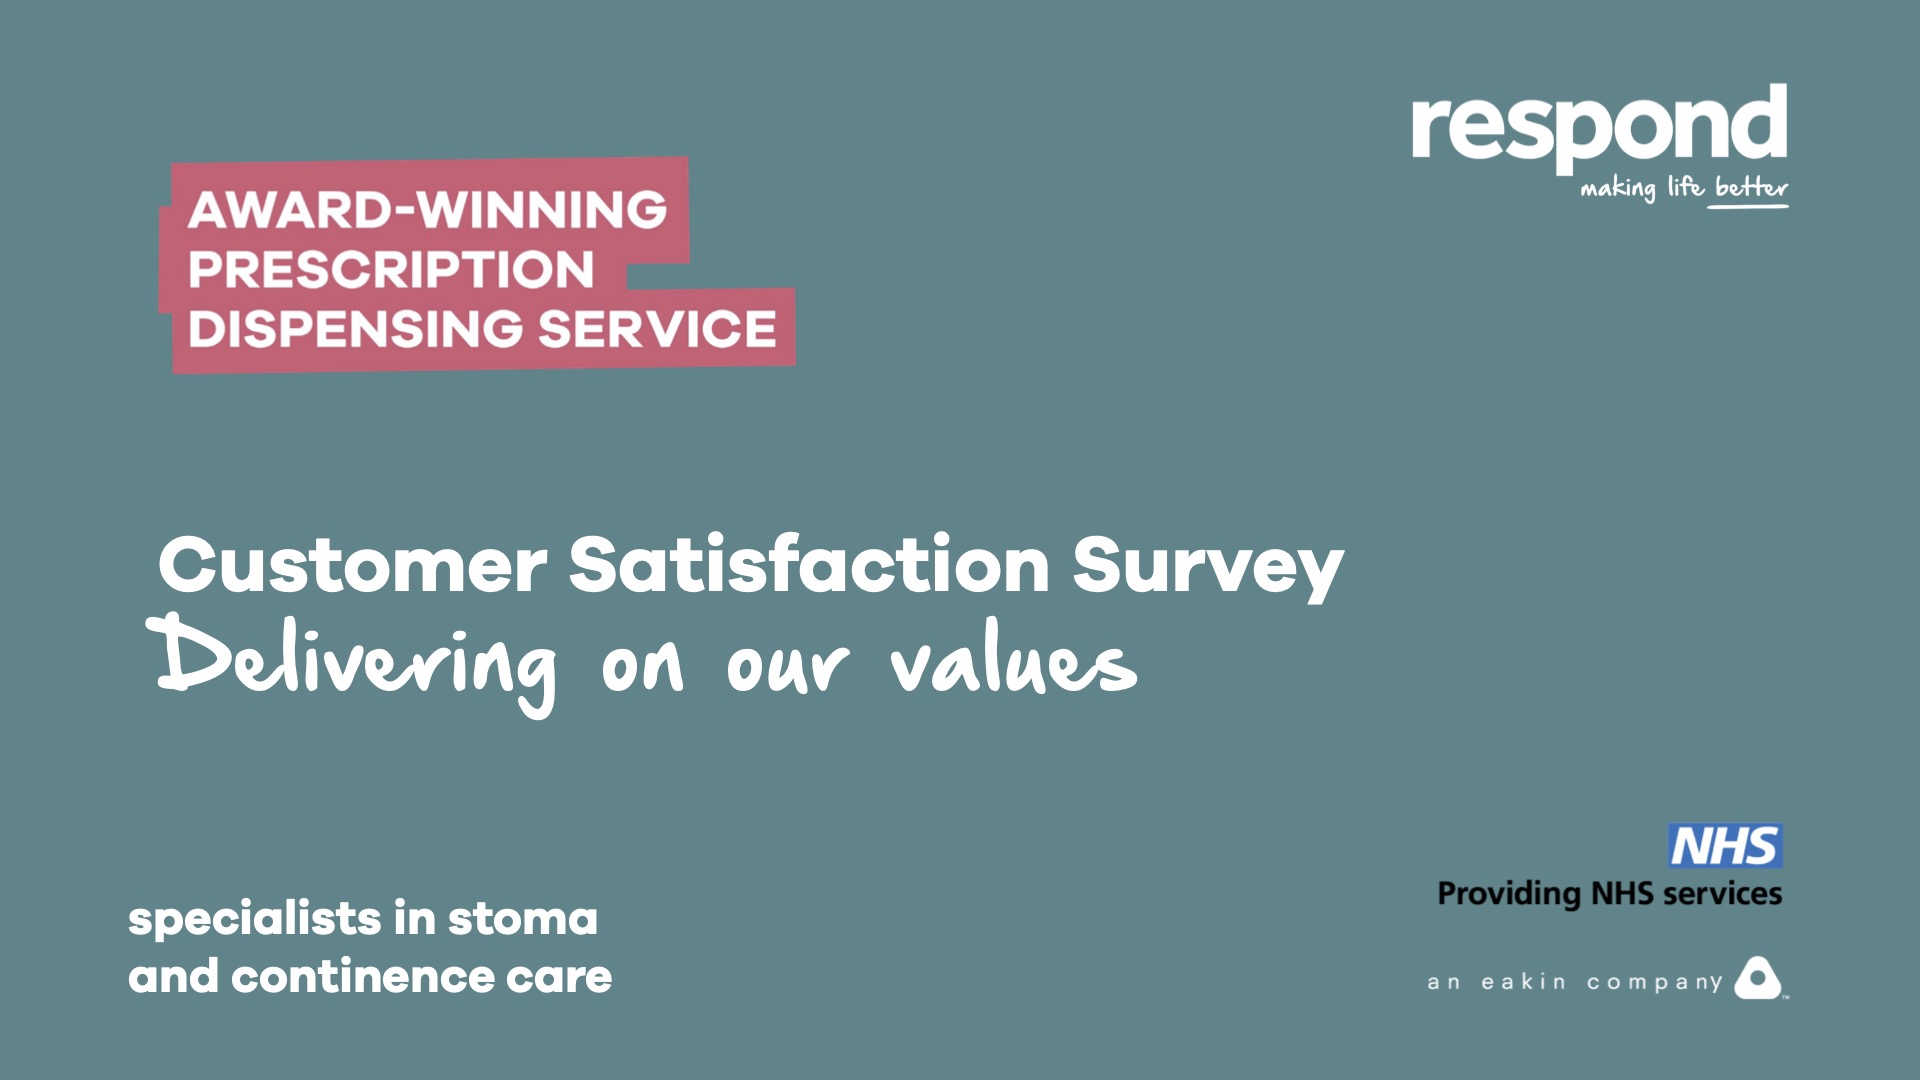 Customer satisfaction survey - delivering on our values